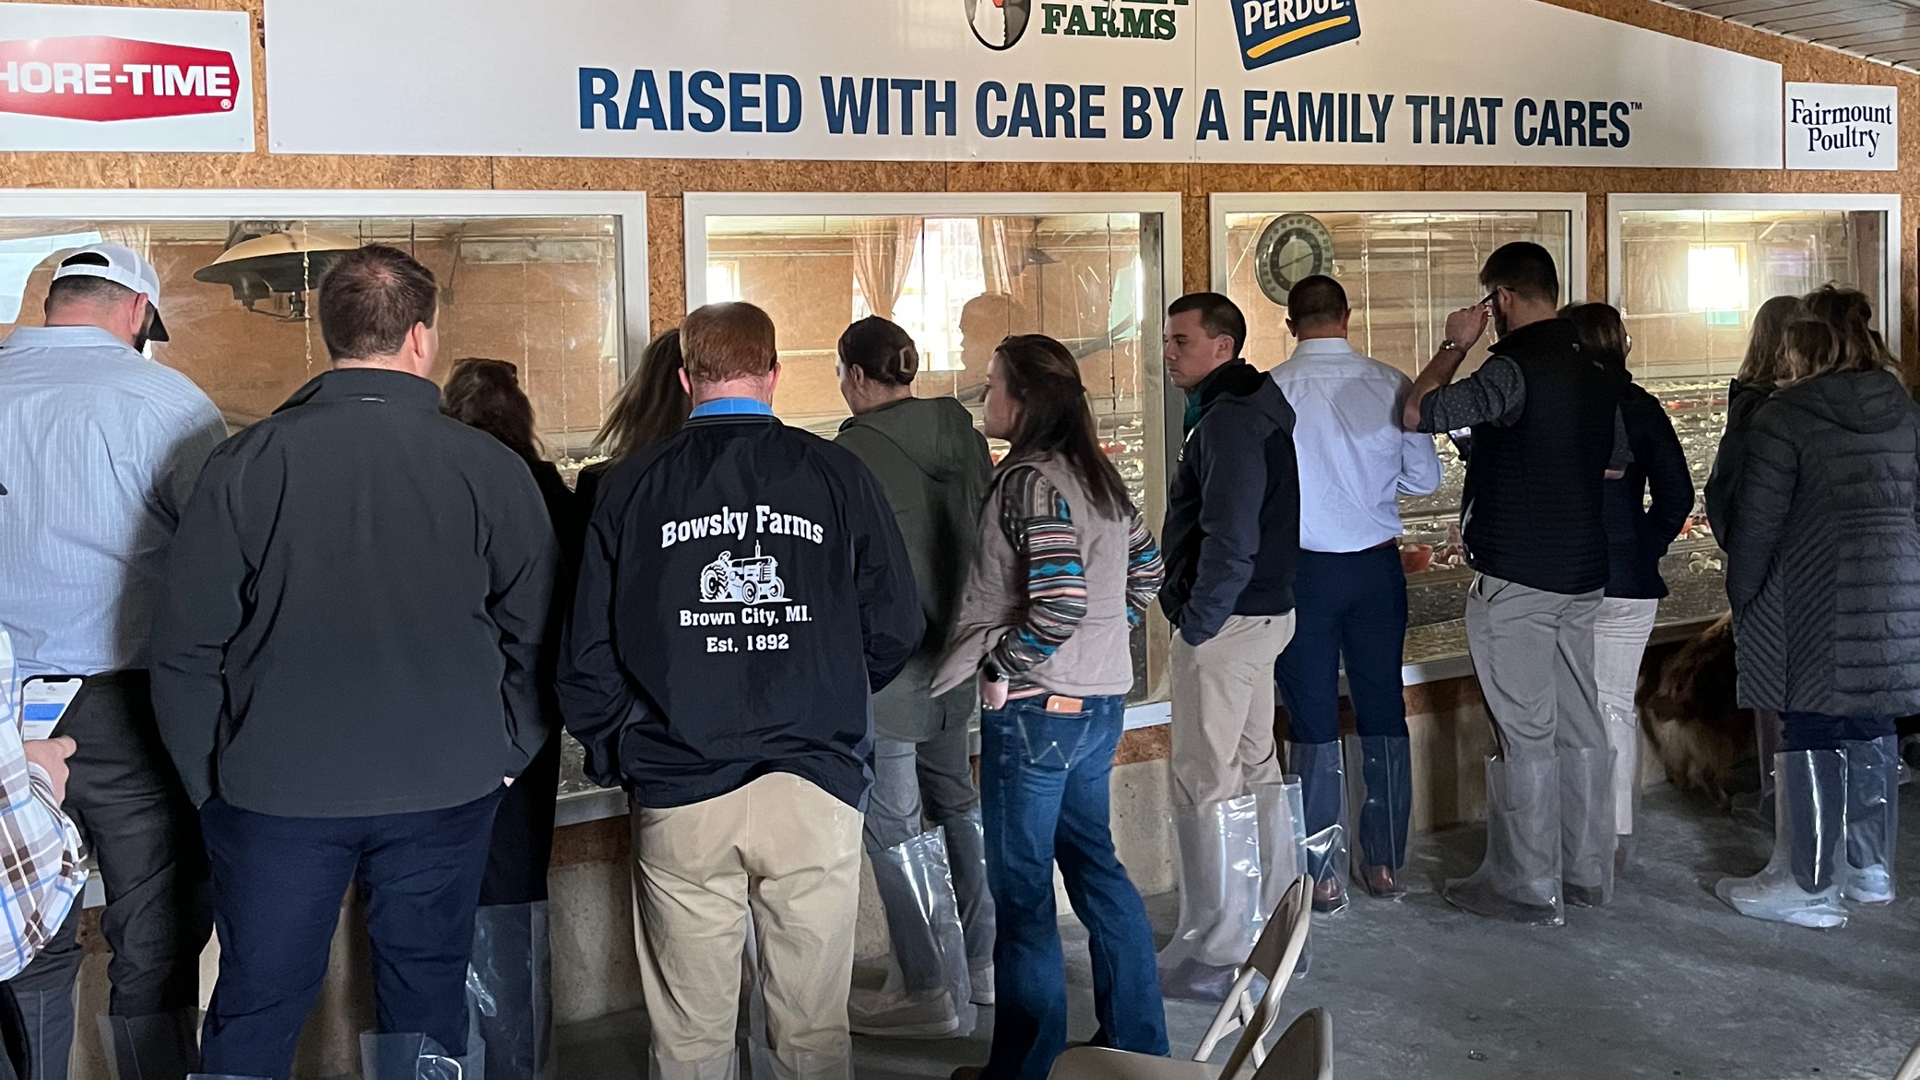 A group of young farmers looking through the observation window of Cooley Farms under a sign that reads "RAISED WITH CARE BY A FAMILY THAT CARES."